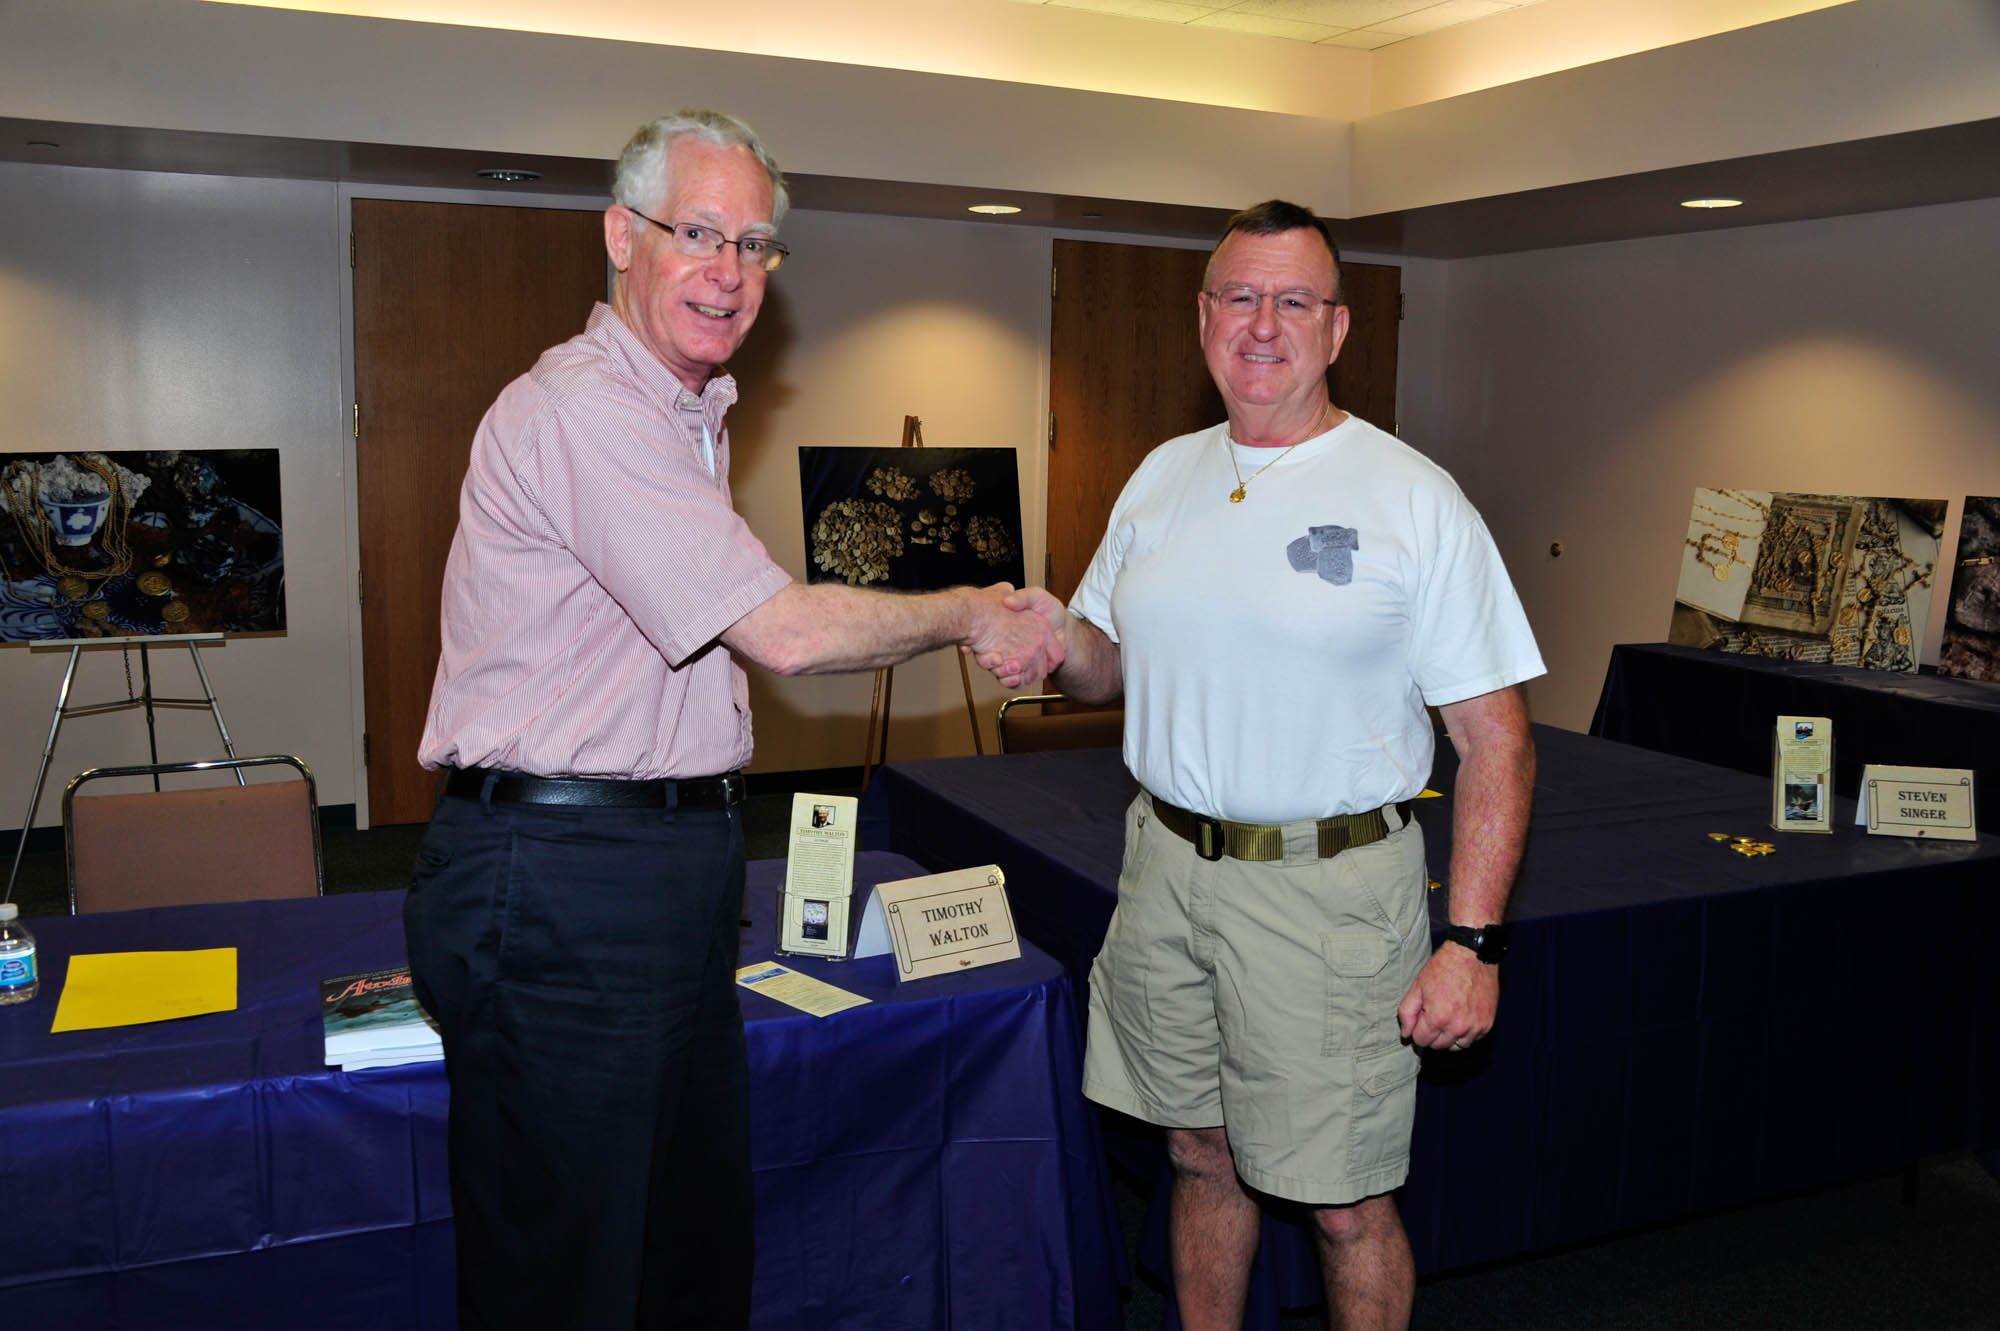 Dr Timothy Walton, author, with diver and author, Mike Brown